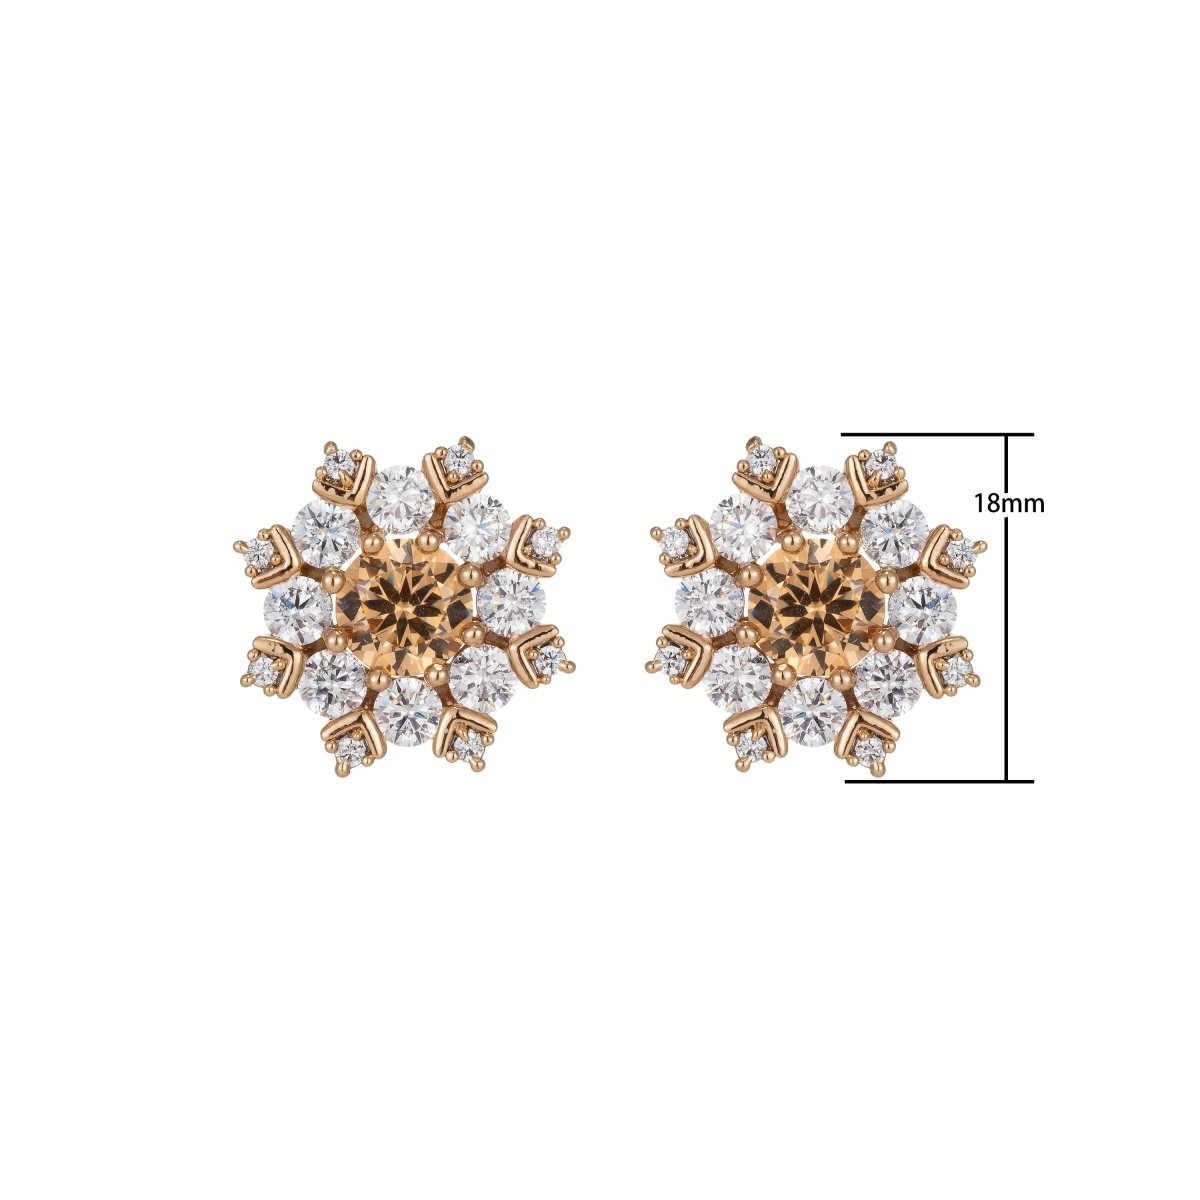 Topaz Snowflake Stud Earrings Gold Filled Cz Snowflakes Earrings Pink Stud Earrings Wedding Jewelry Best friend Gift for her Q-020 - DLUXCA